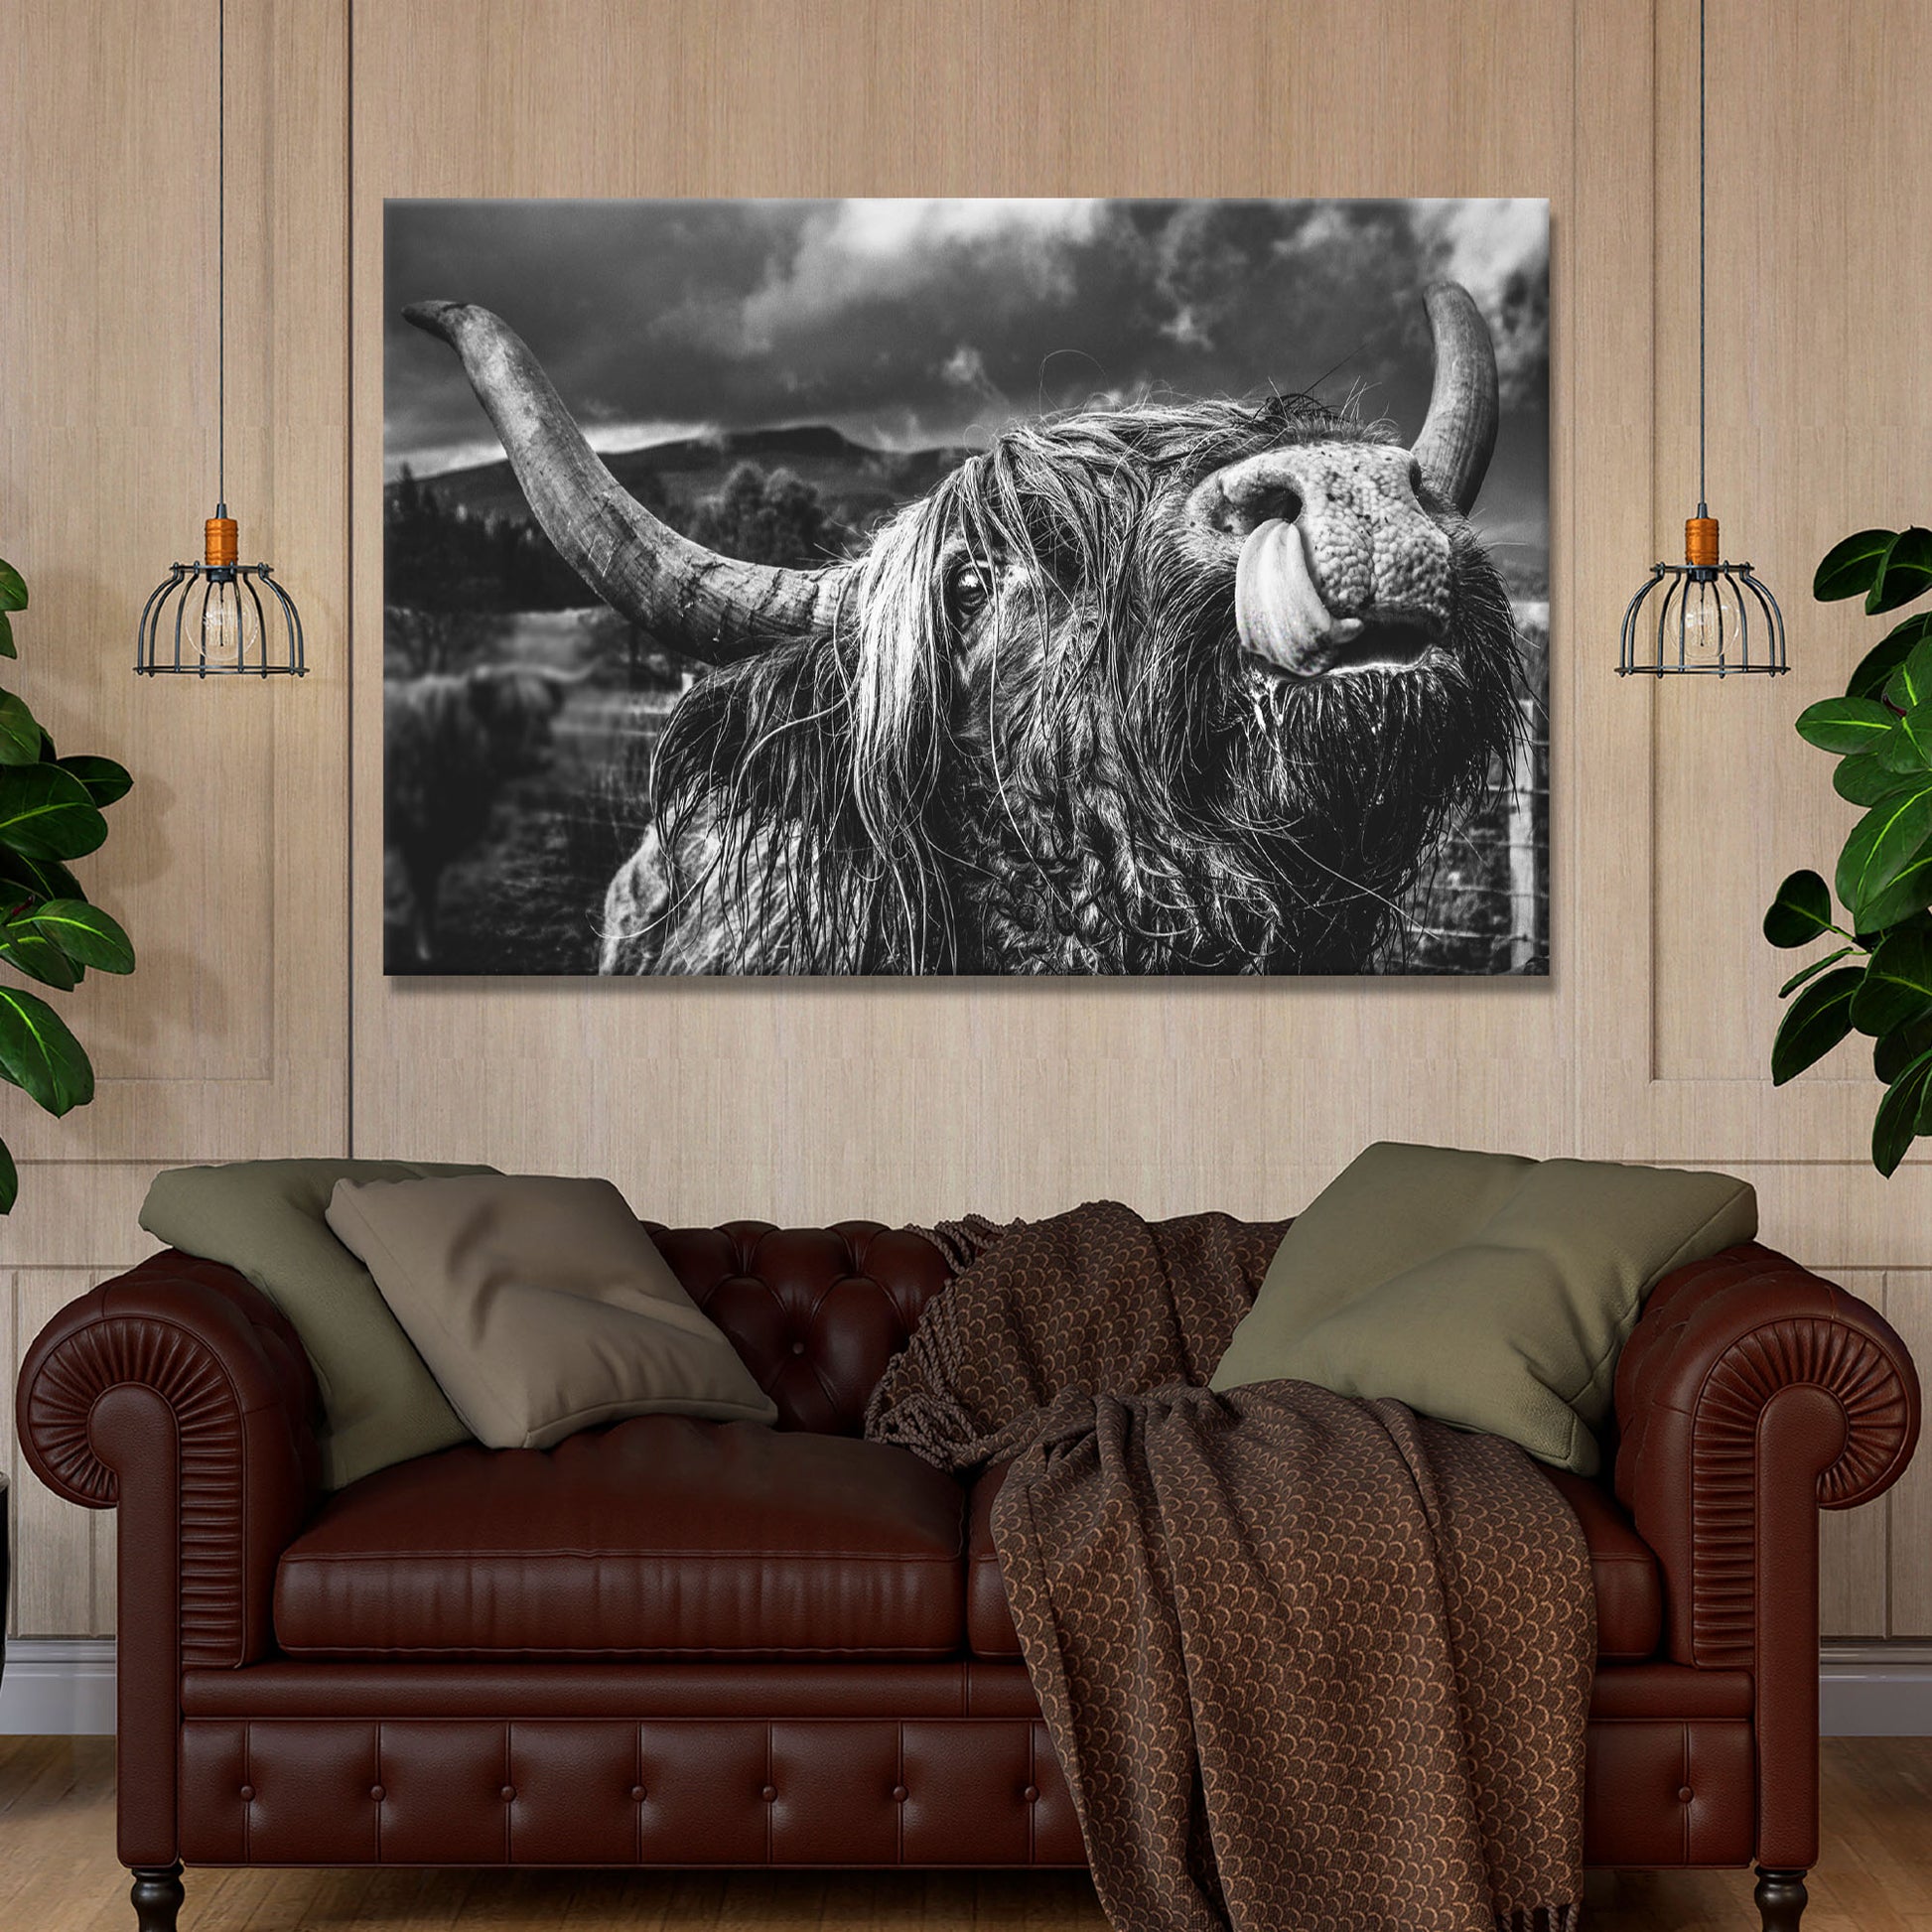 West Highland Cow Monochrome Canvas Wall Art - Image by Tailored Canvases